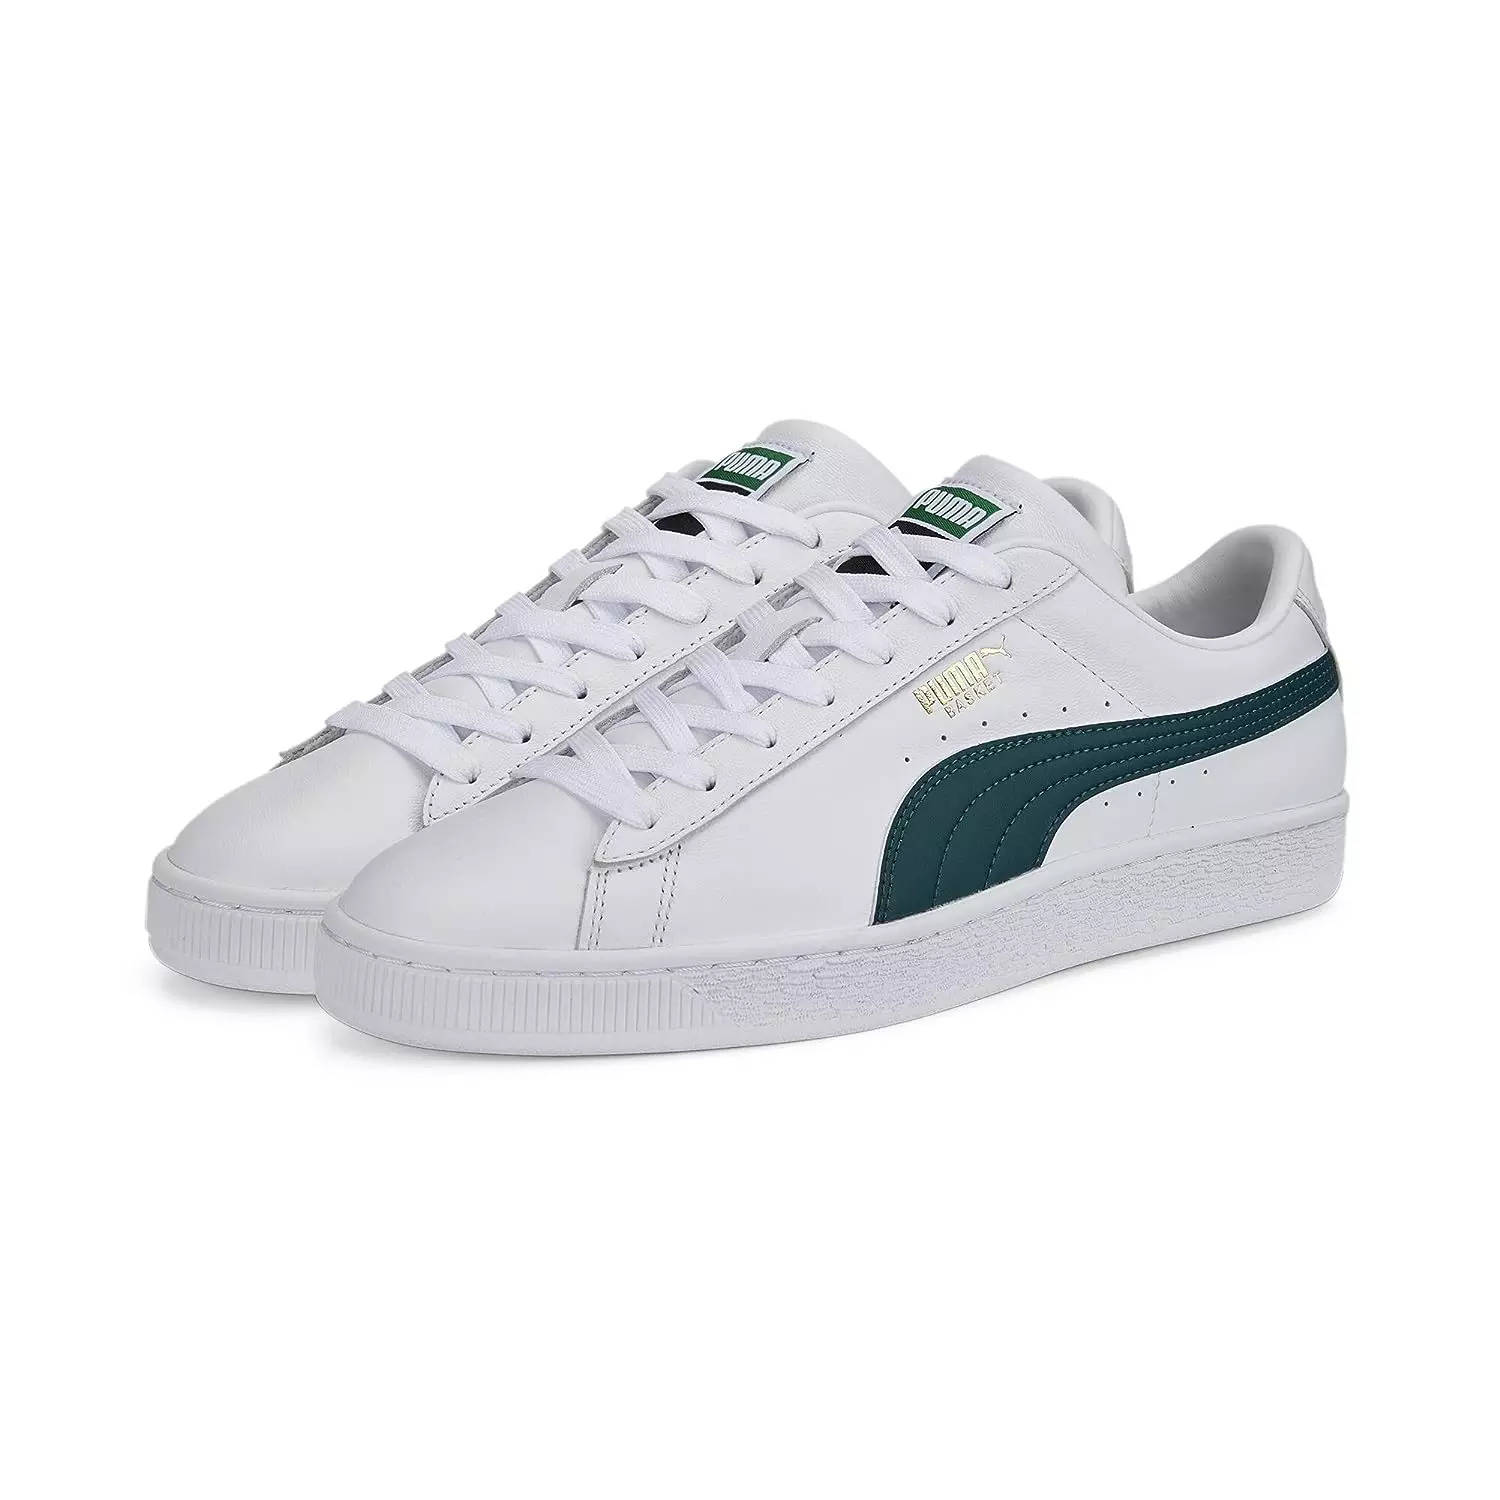 Shop Puma Online | Buy Latest Collections On 6thStreet Qatar